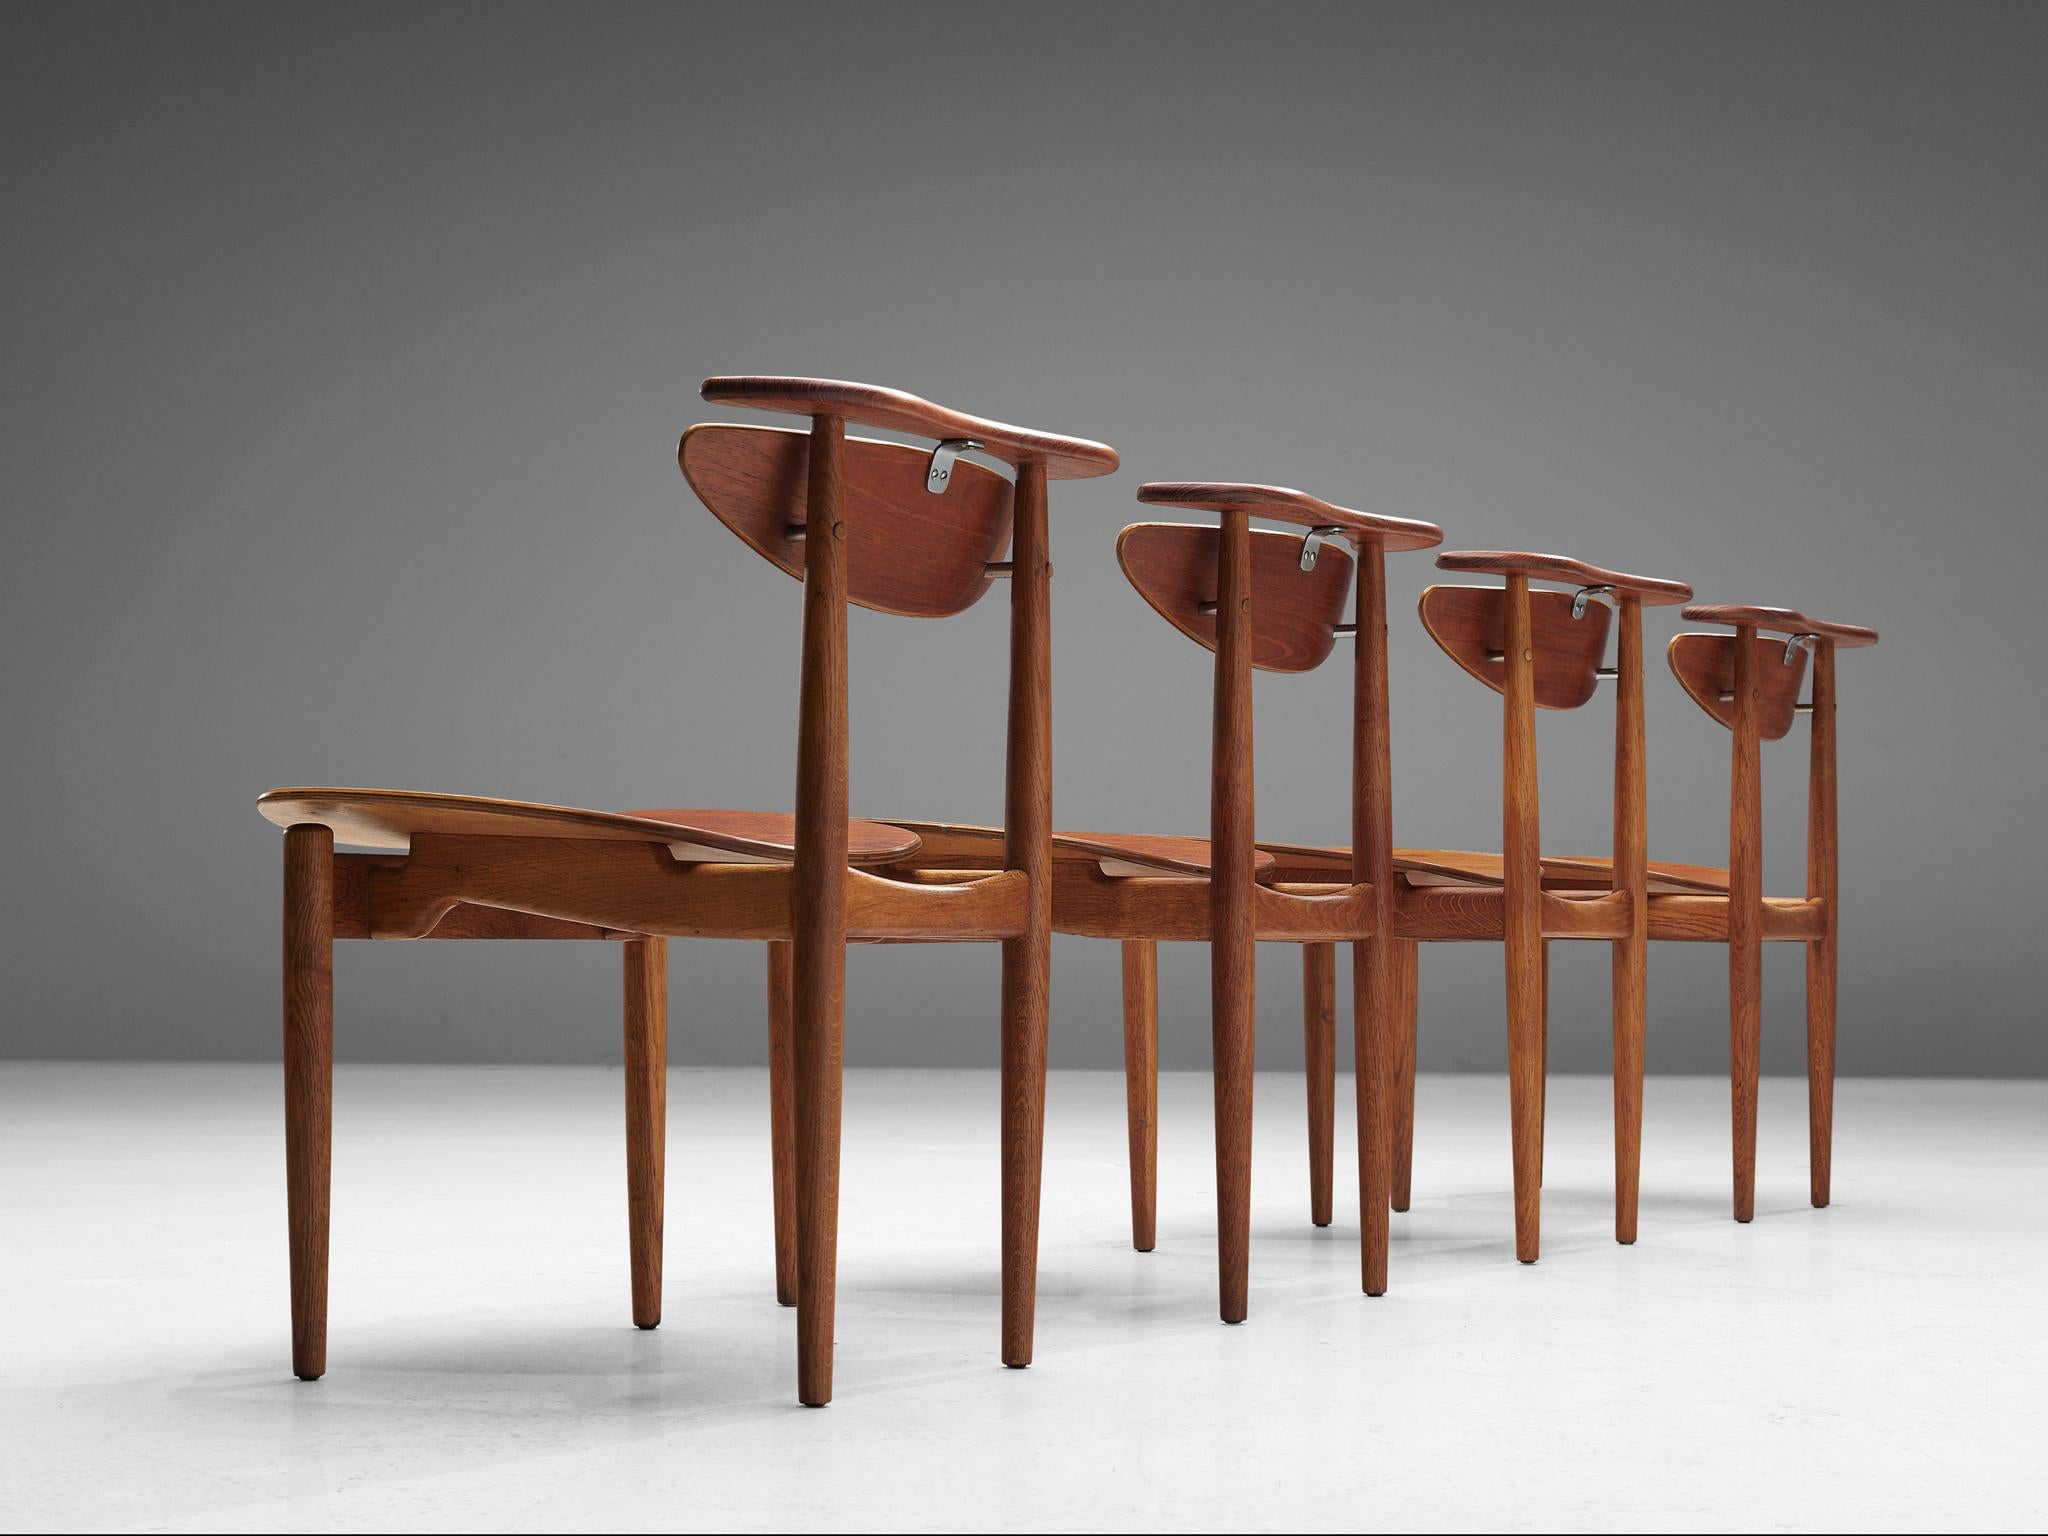 Finn Juhl for Bovirke, 'reading' dining chairs, oak, teak, metal, Denmark, 1953.

In 1953, Finn Juhl designed this 'Reading Chair' for Bovirke. The chair is organically shaped featuring curvaceous forms and round finishes. The backrest is in great